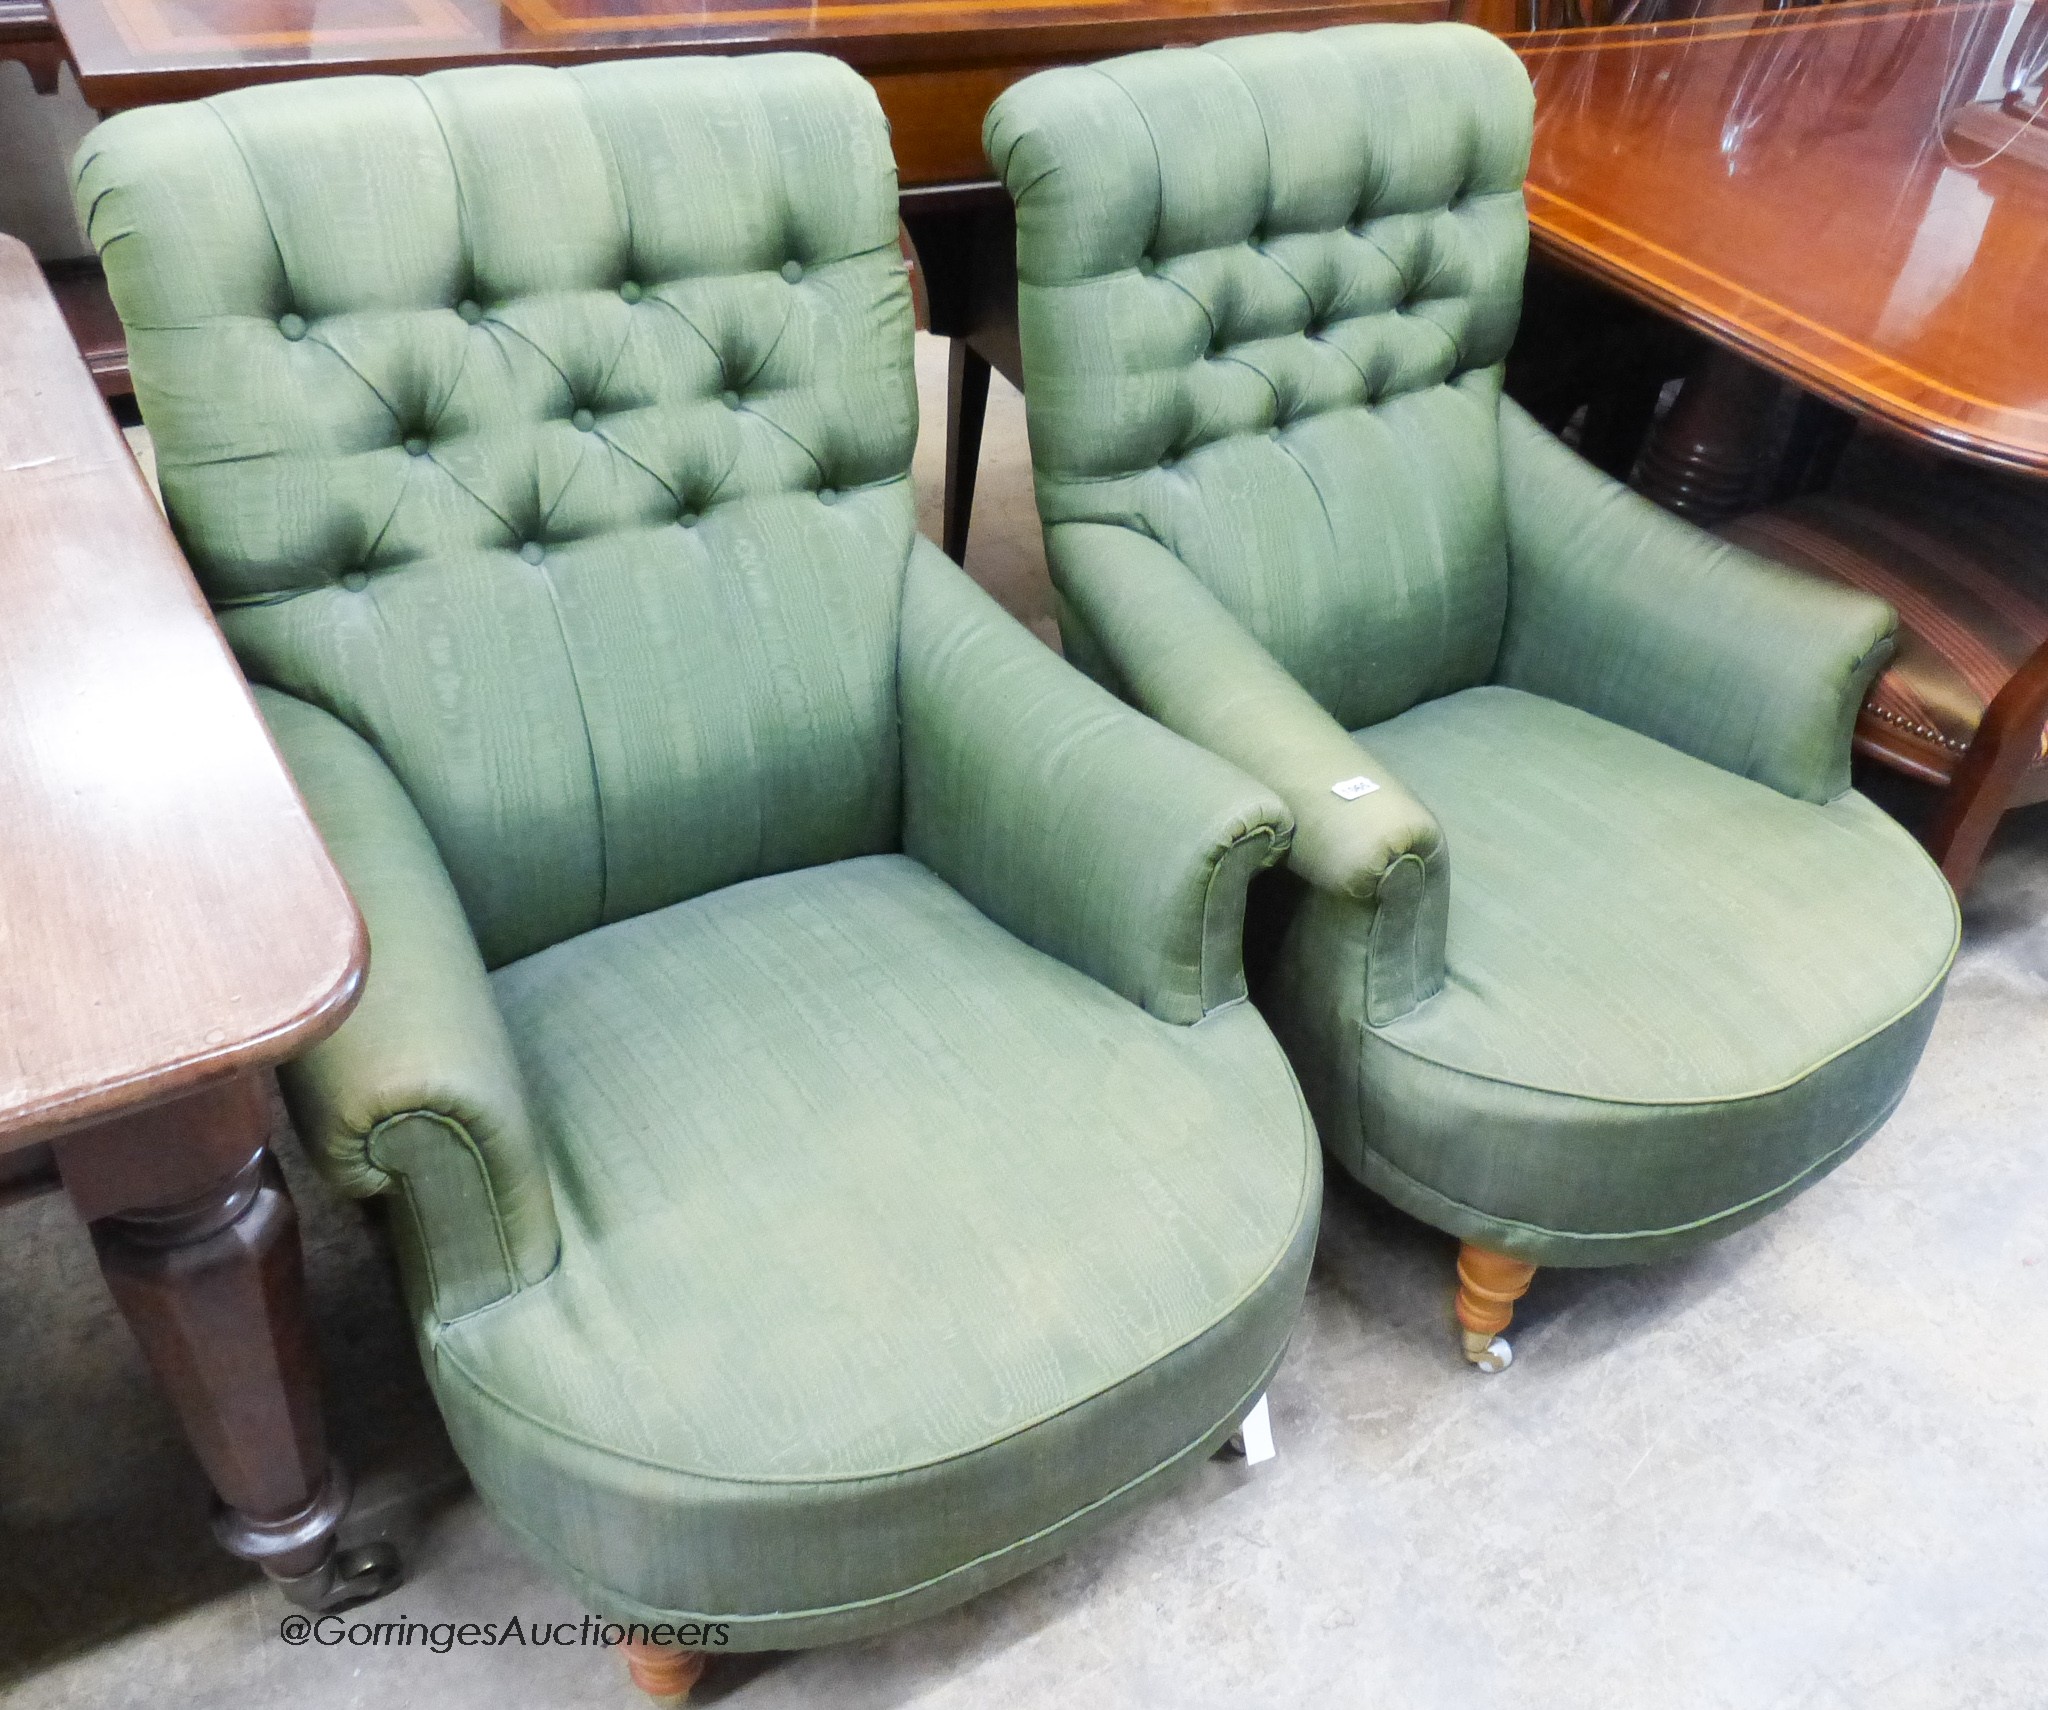 A pair of Victorian style armchairs upholstered in green moire silk.